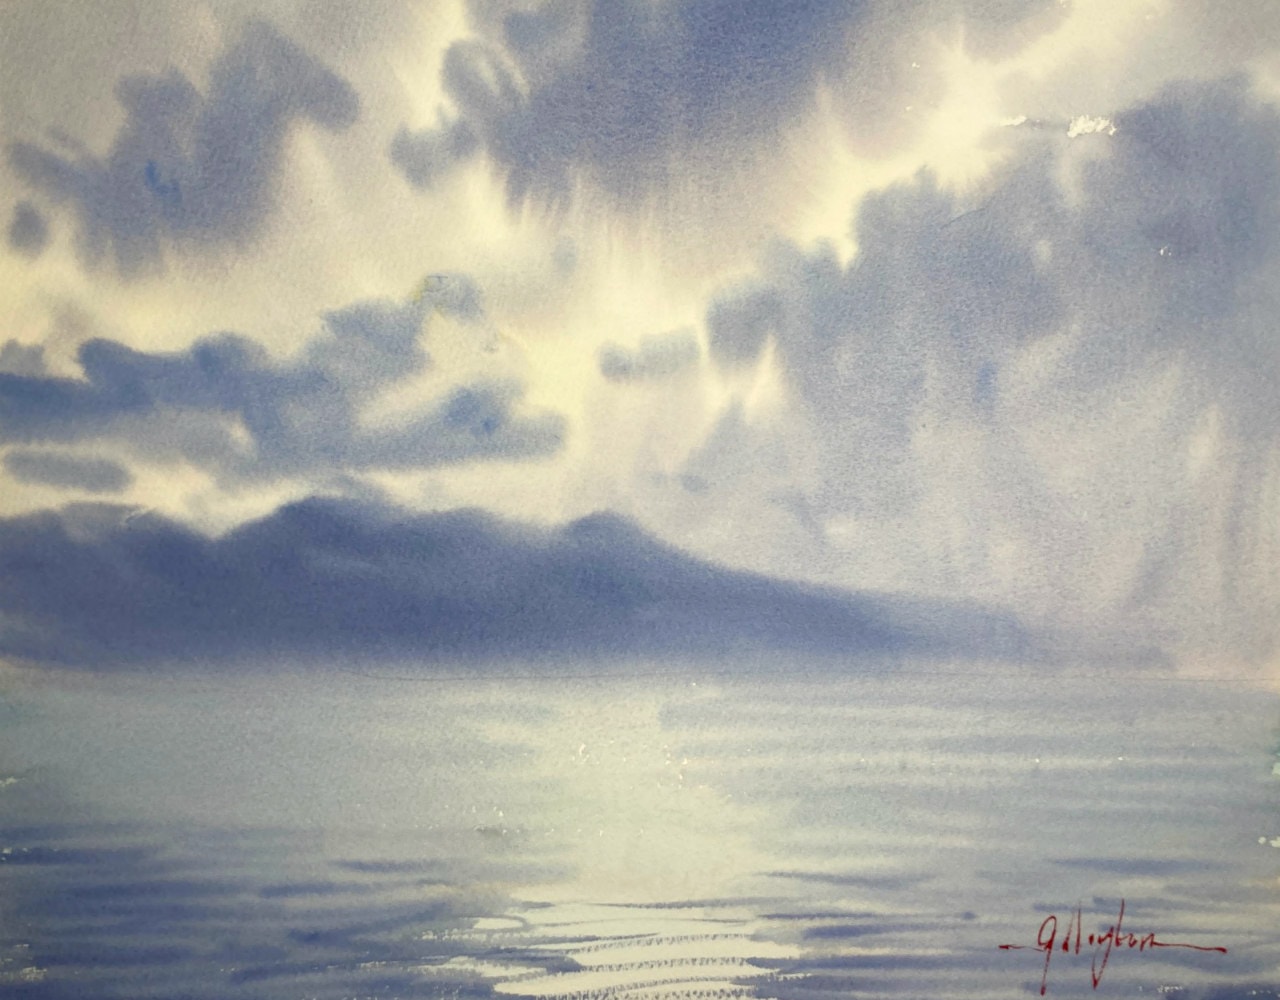 Painting a hauntingly soft and beautiful seascape